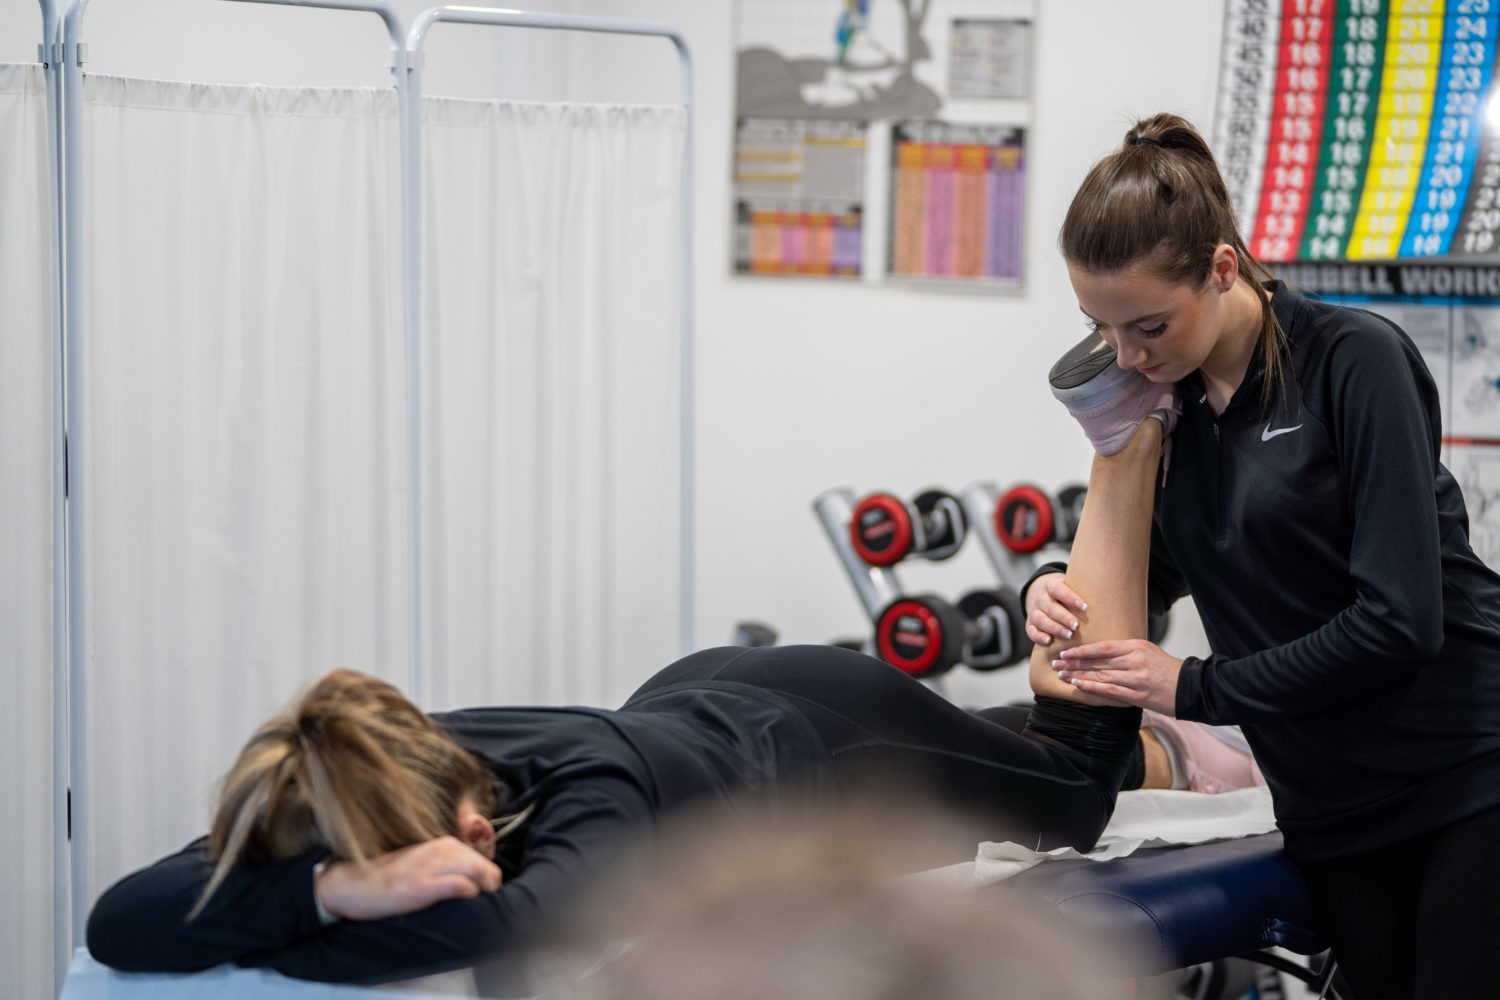 A student lying on a physio bed with another student working on their leg